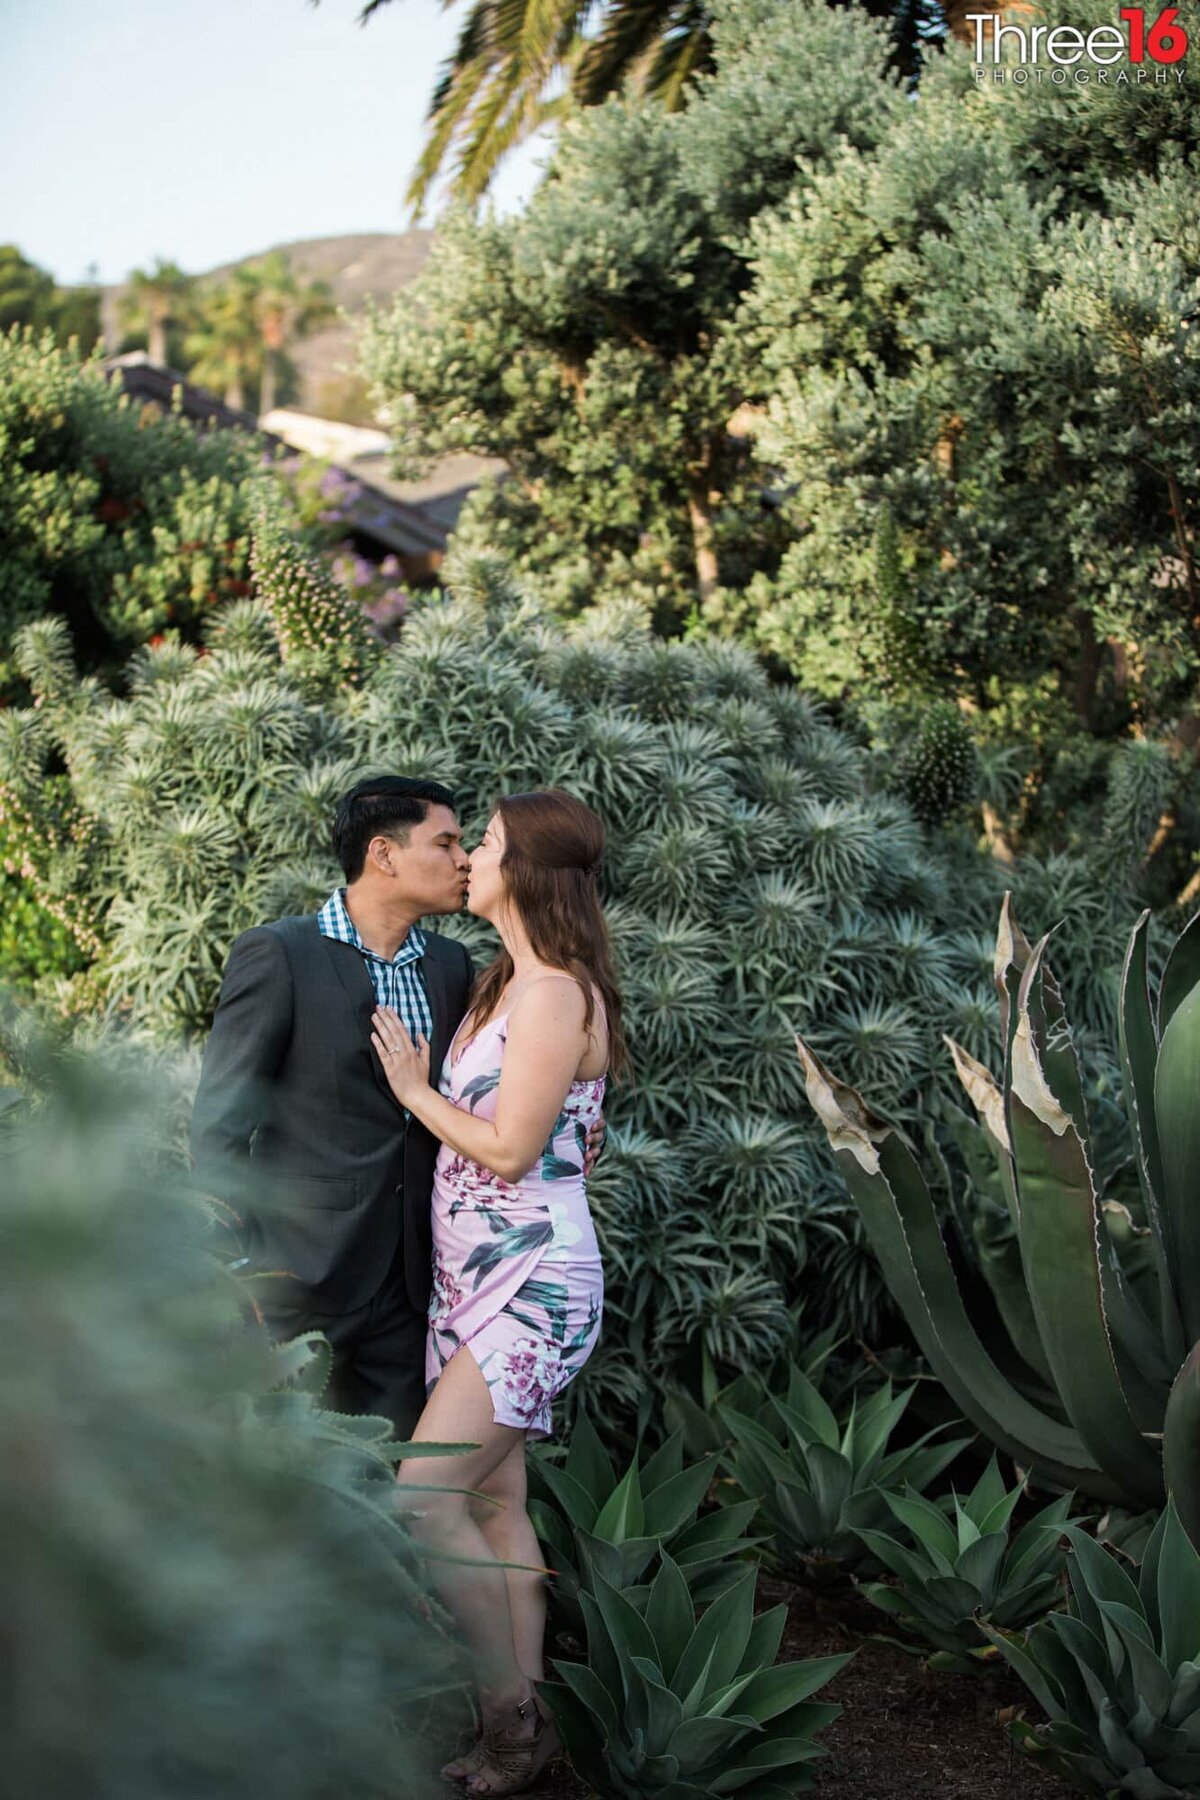 Newly engaged couple share a tender kiss amongst the greenery at The Montage after a marriage proposal